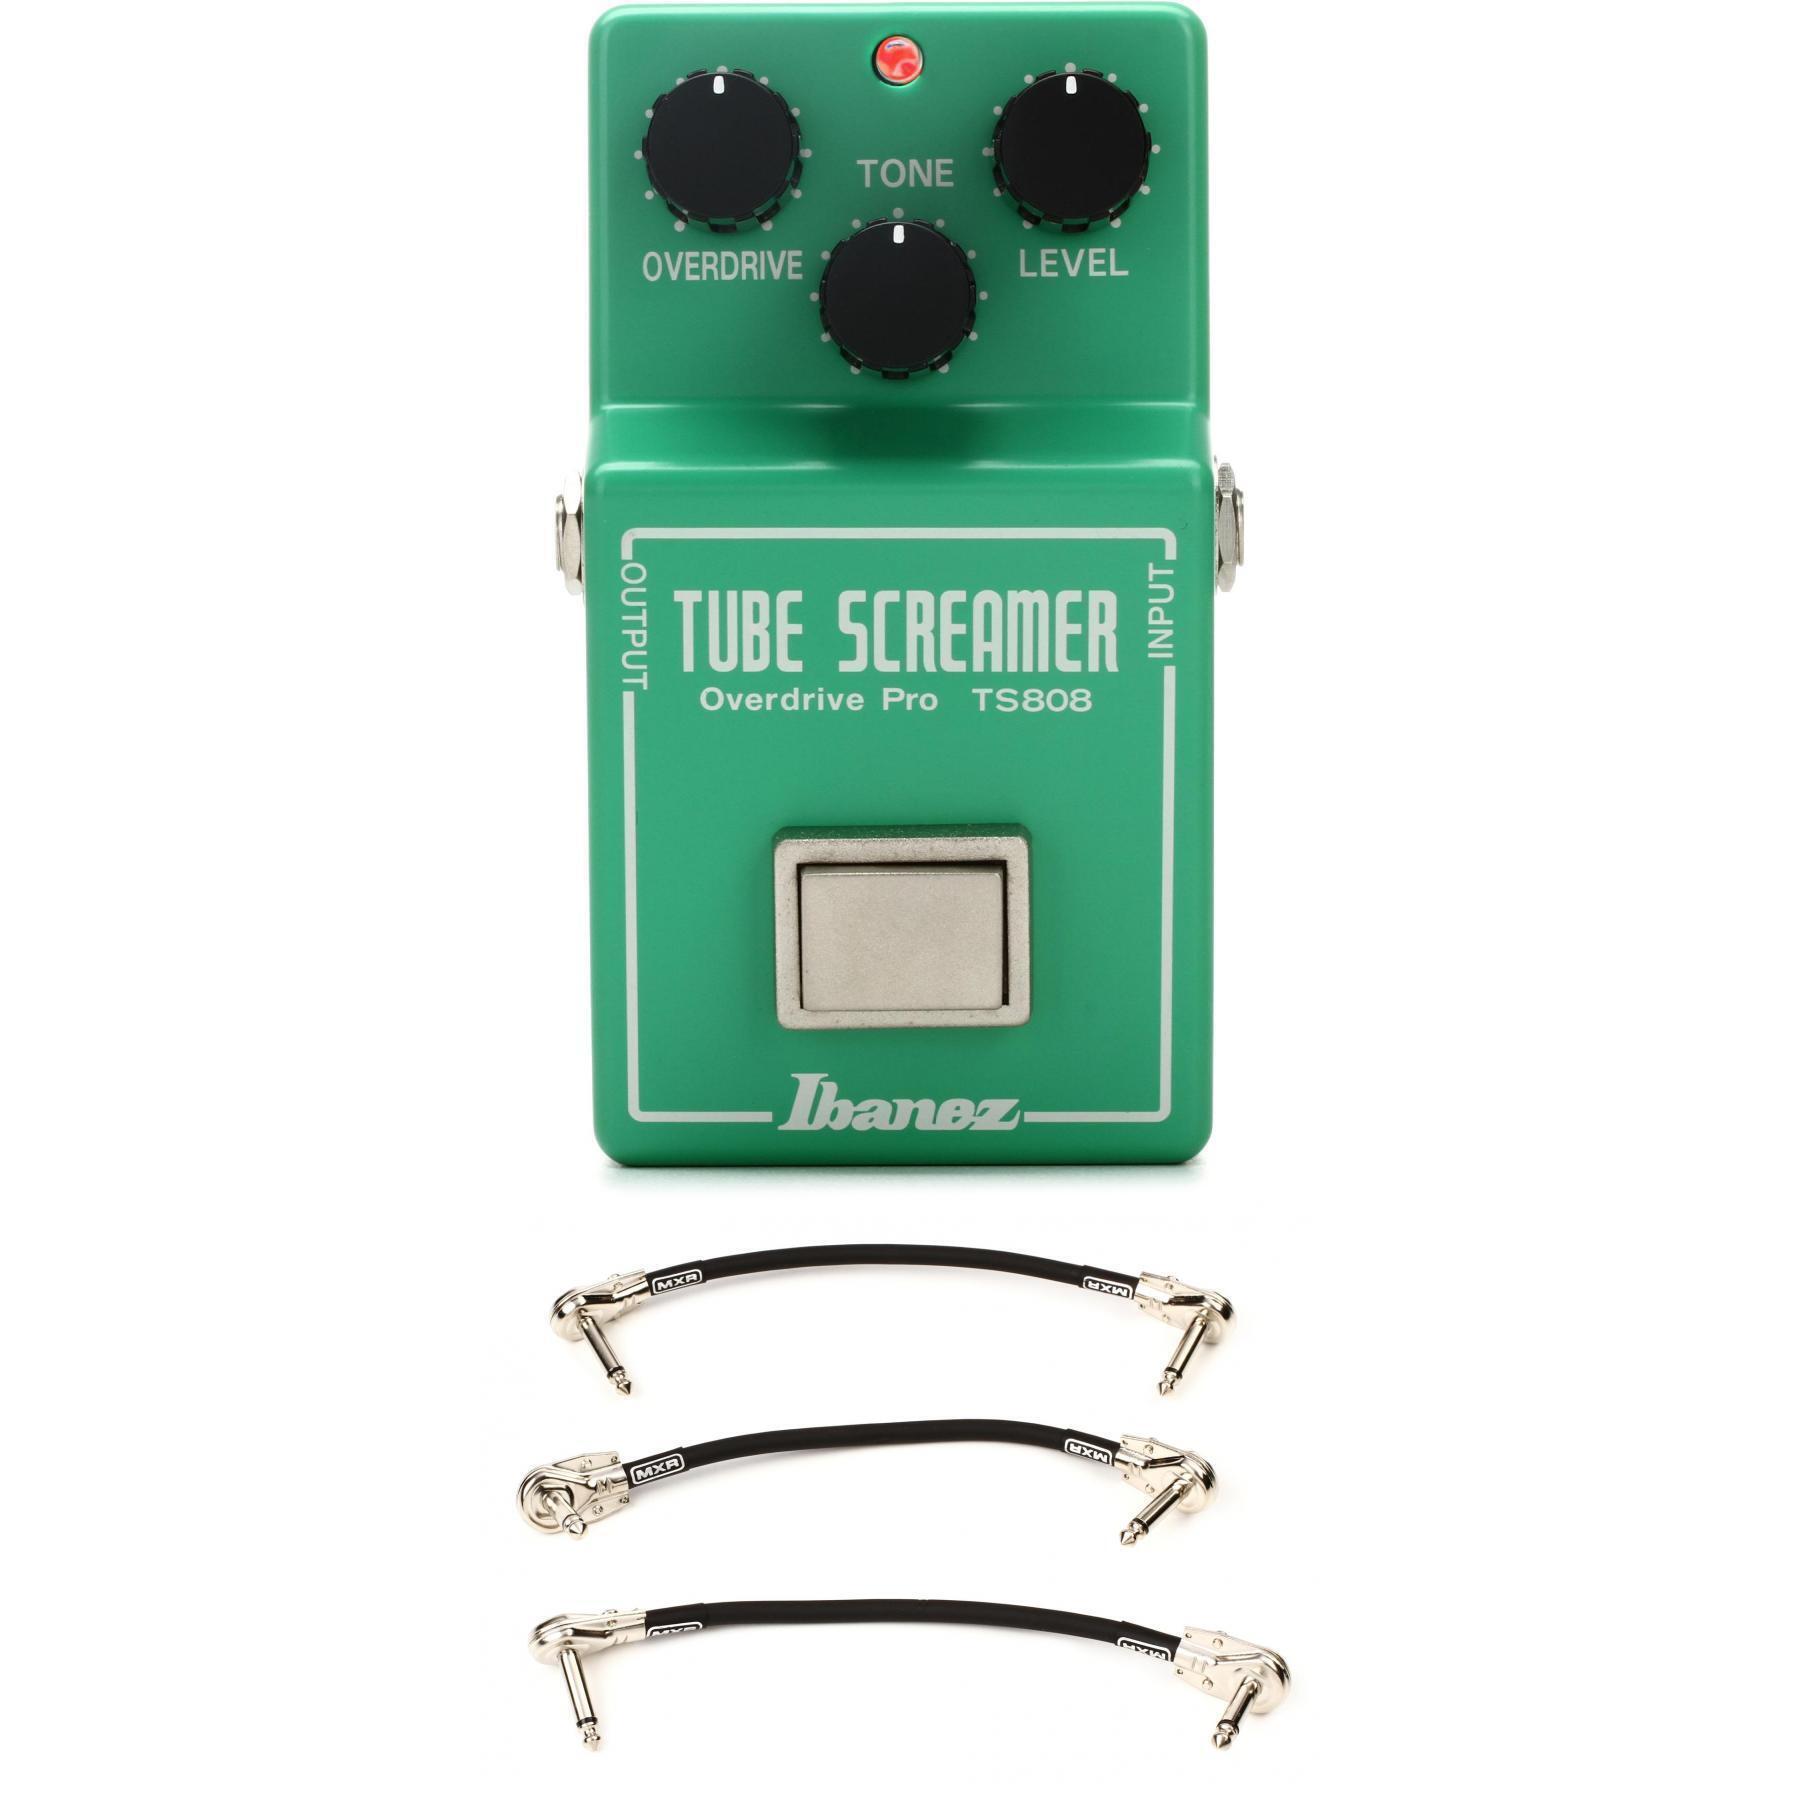 Ibanez TS808 Original Tube Screamer Overdrive Pedal with 3 Patch Cables